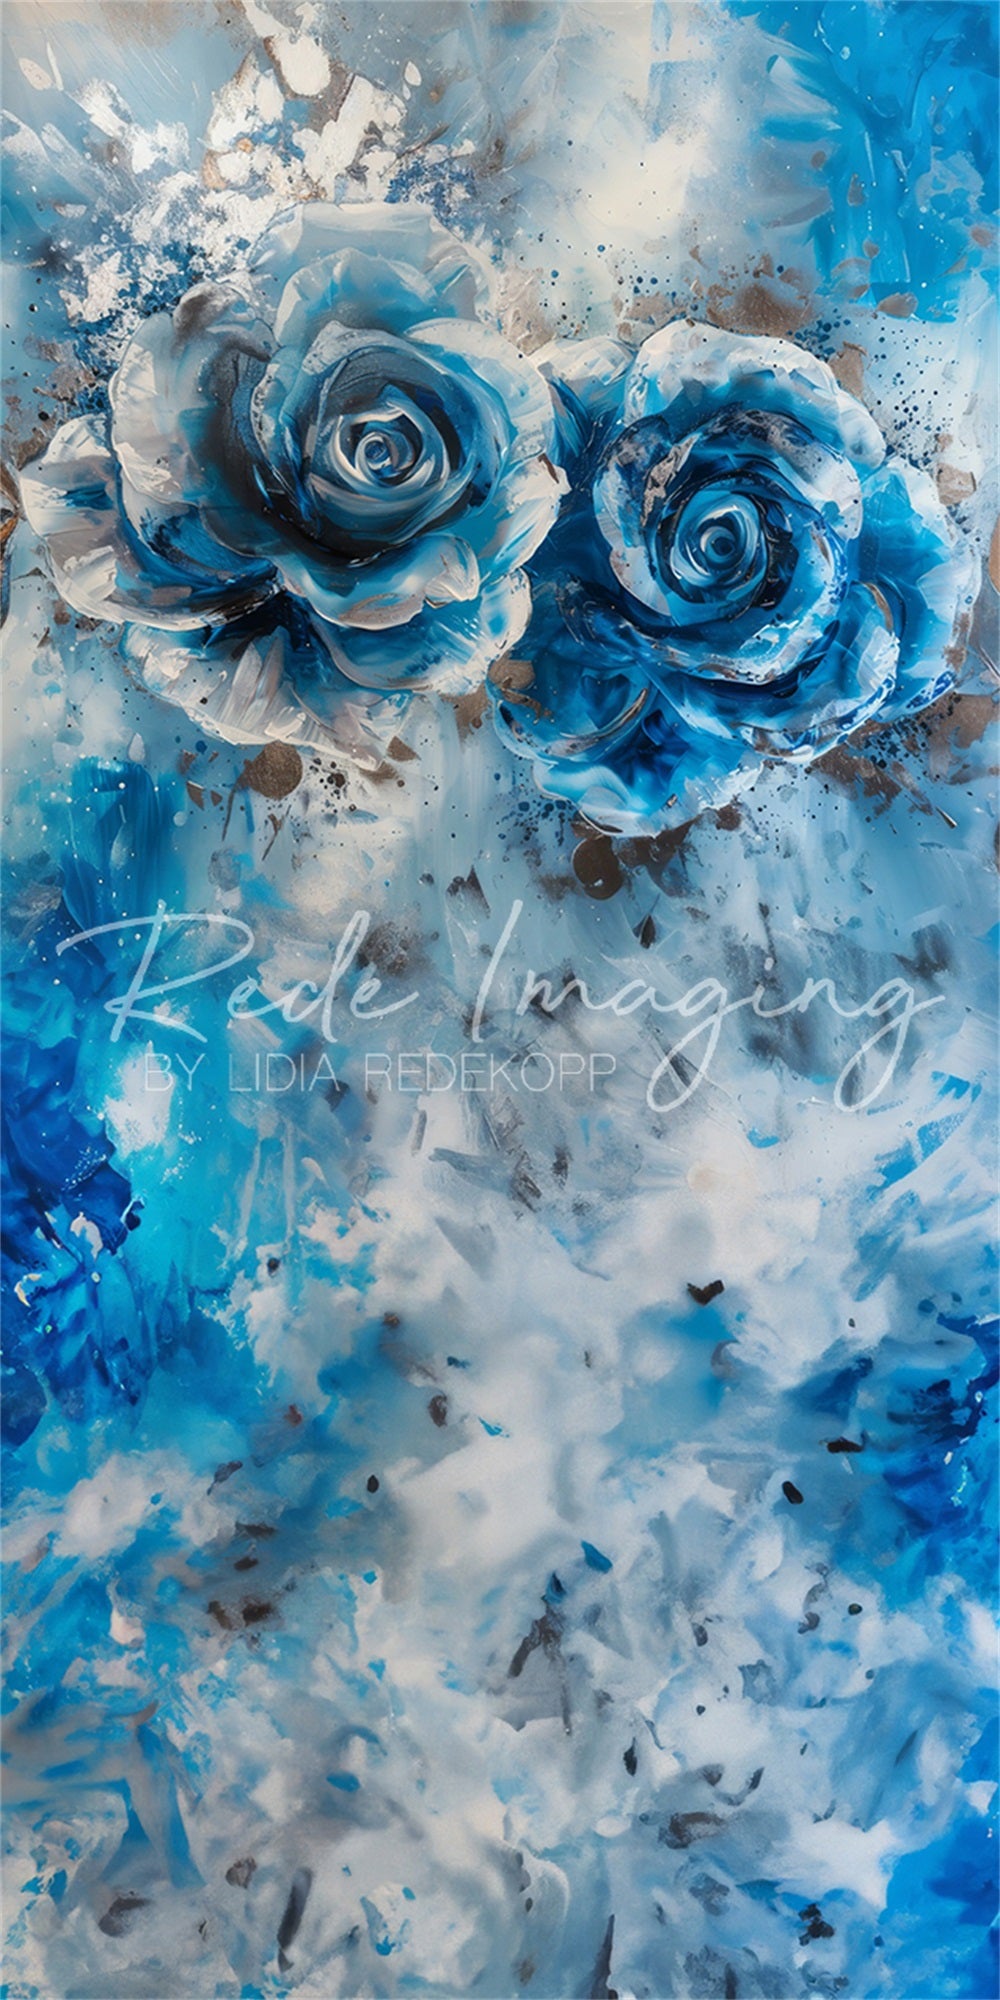 Kate Sweep Abstract Fine Art Blue and Silver Graffiti Rose Wall Backdrop Designed by Lidia Redekopp